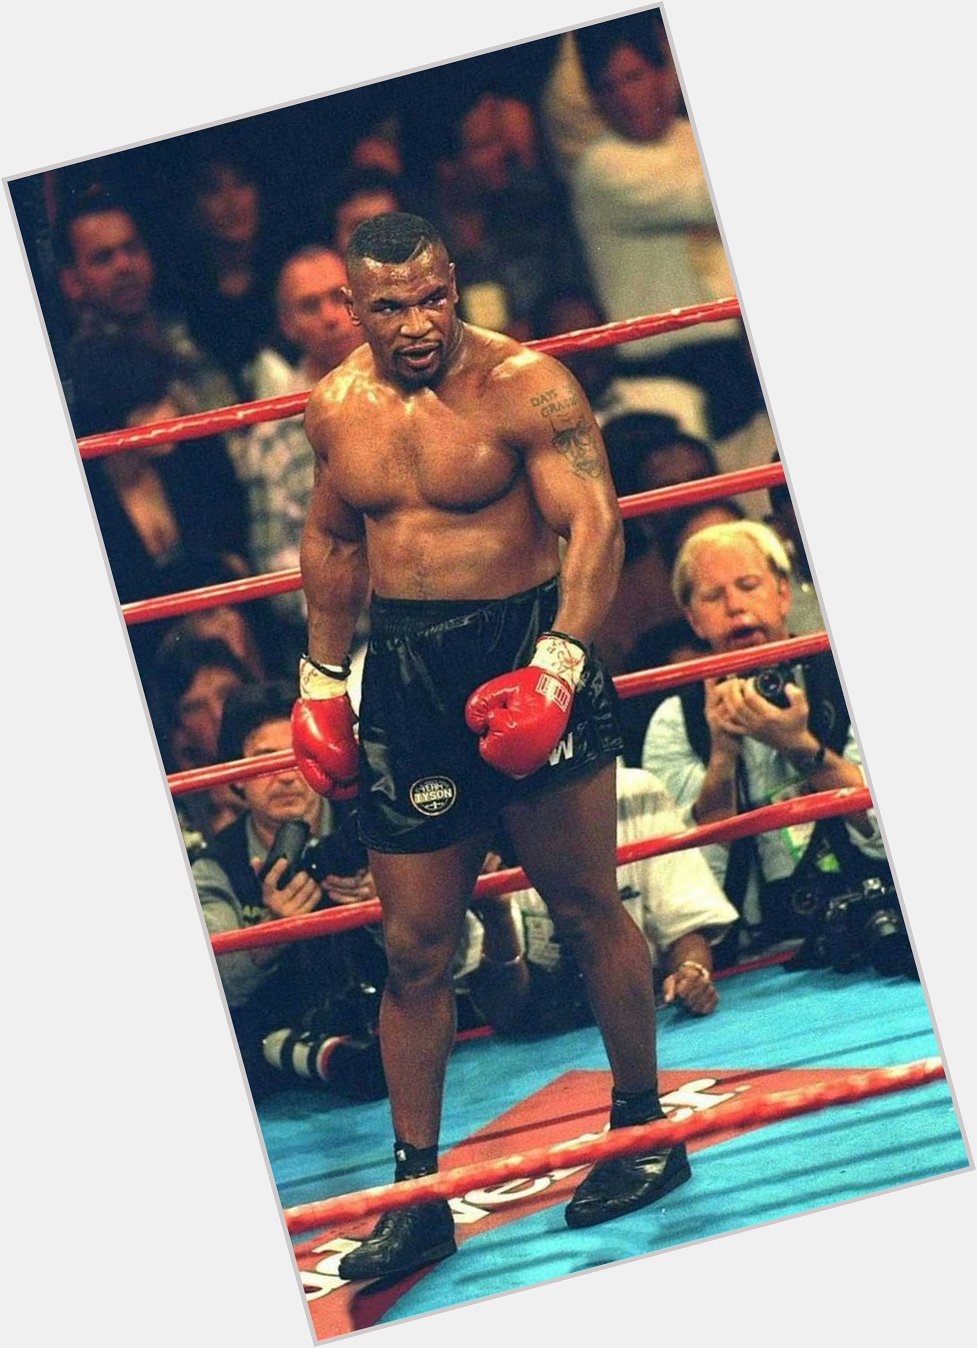 Happy birthday Mike Tyson the greatest boxer of all time is turning 57 years today 